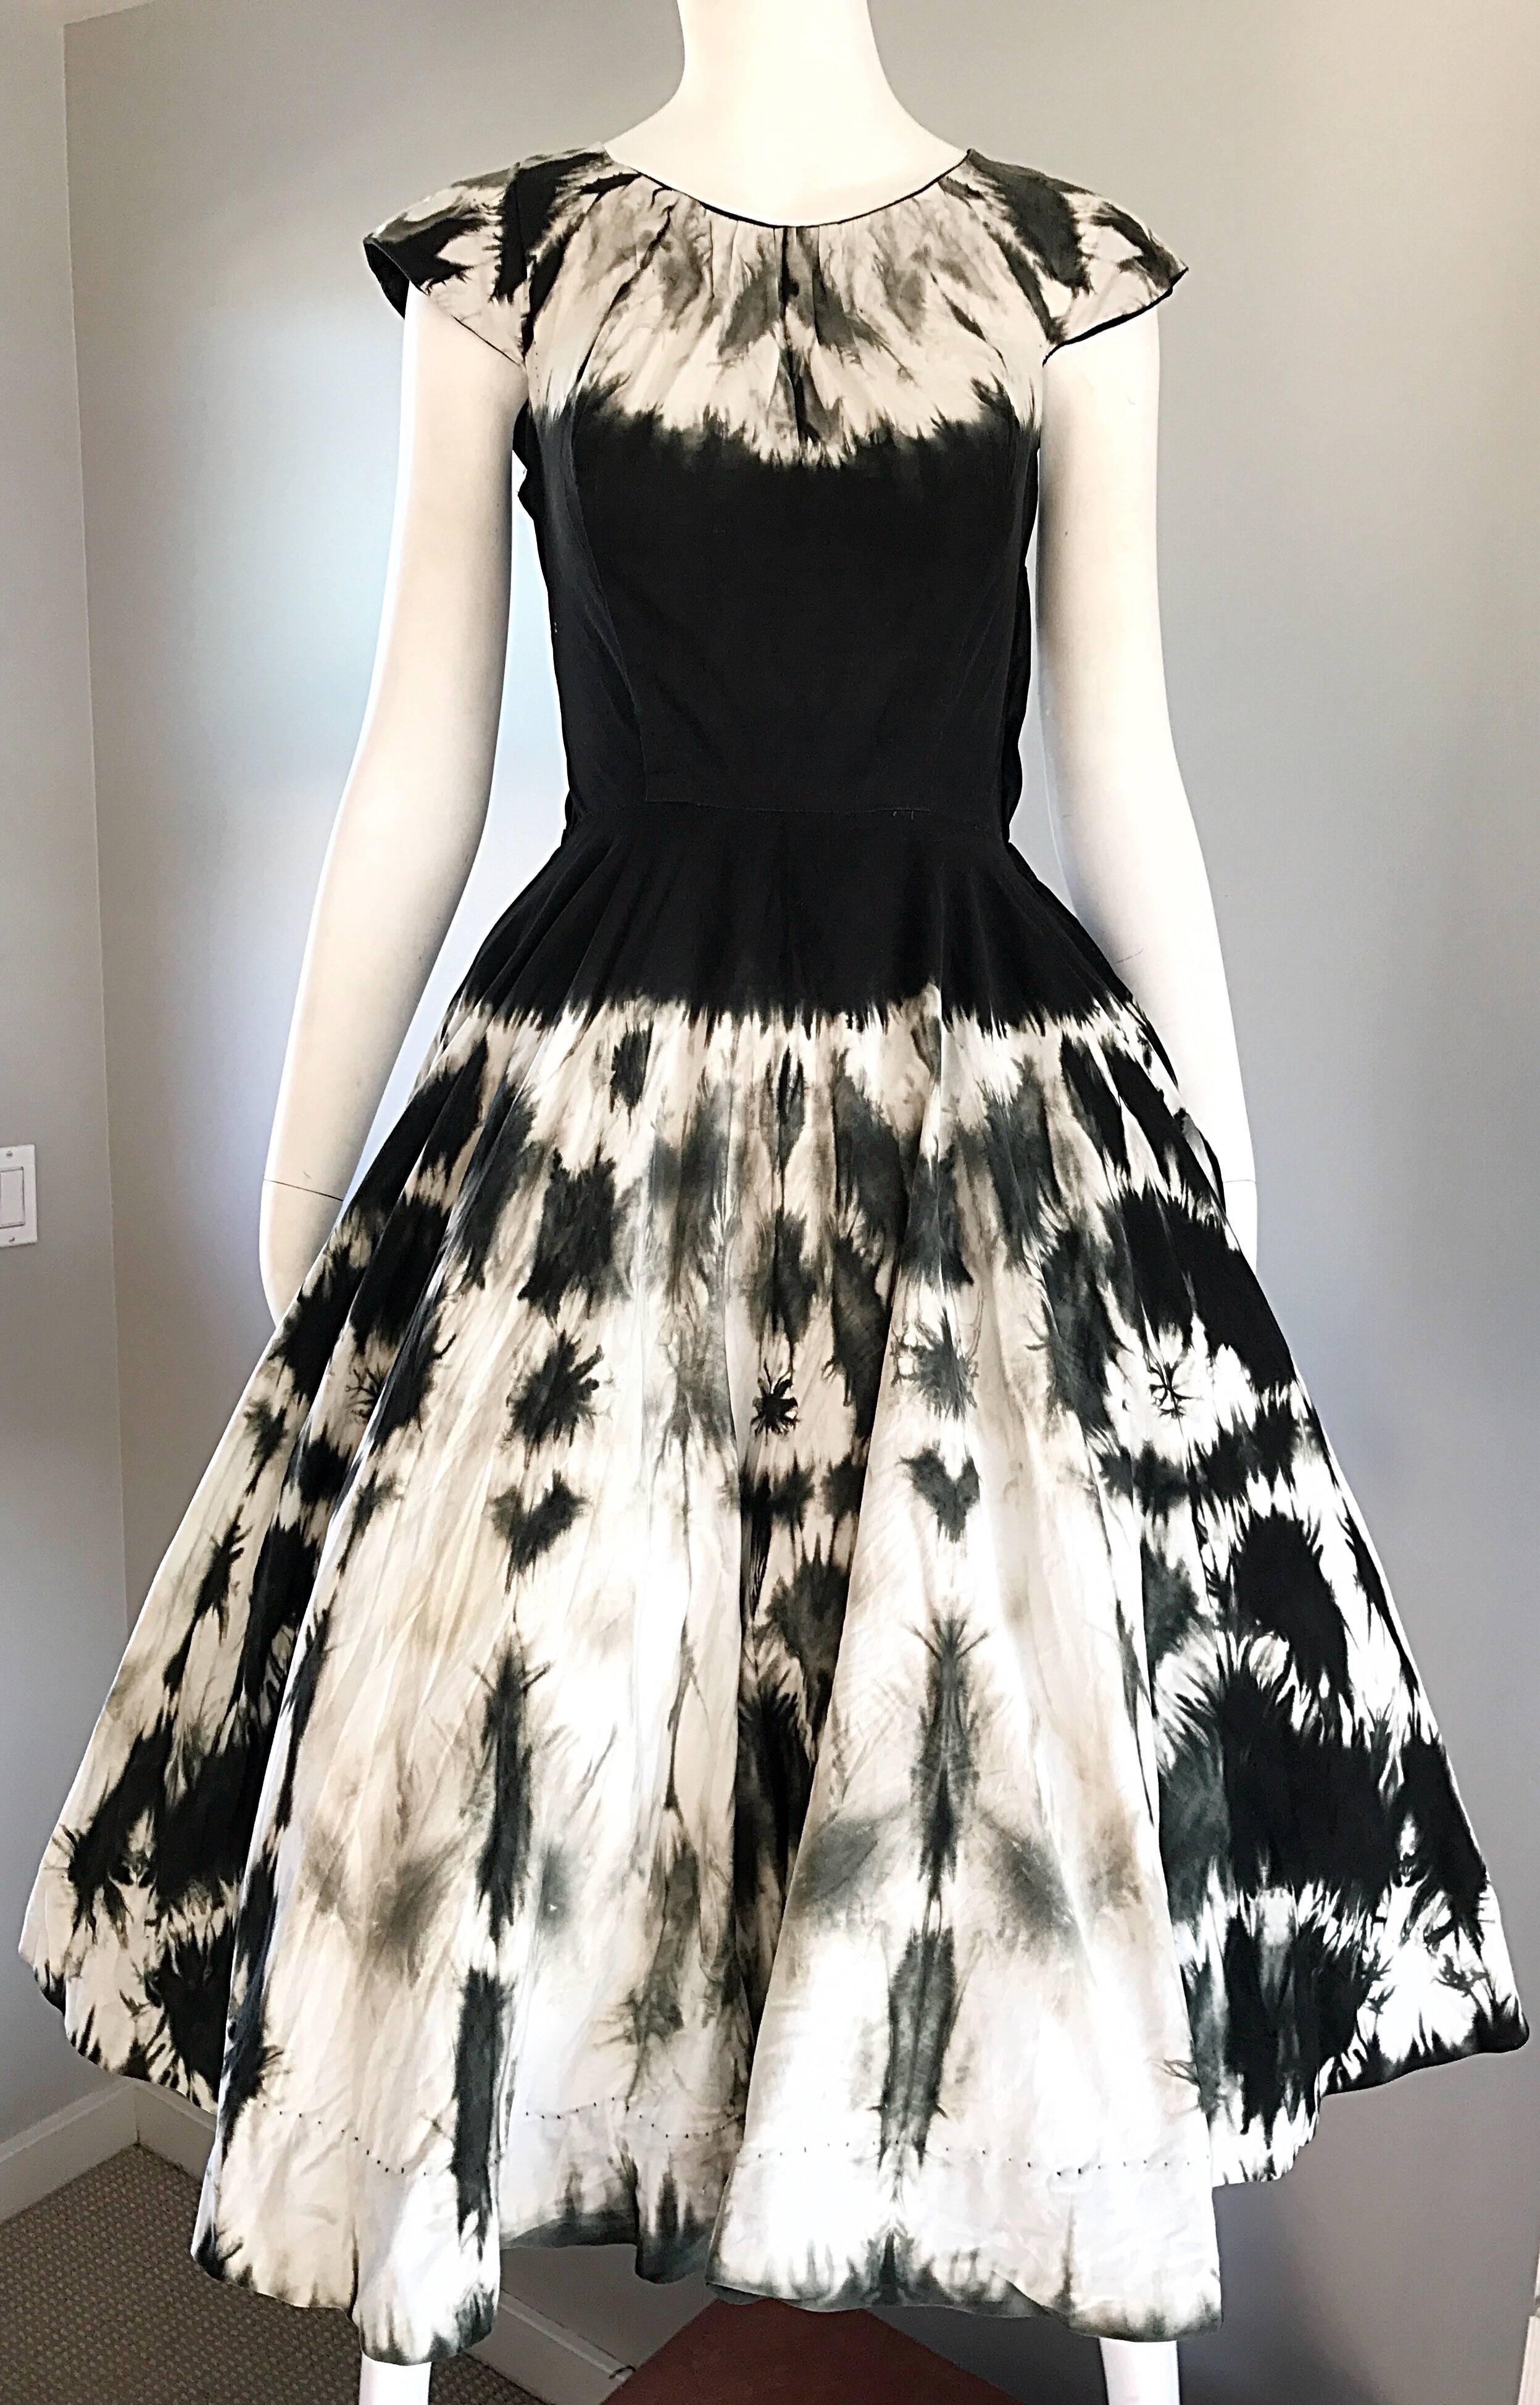 1950s Madalyn Miller 1950s Black and White Tie Dye Cotton Chic Vintage 50s Dress 2